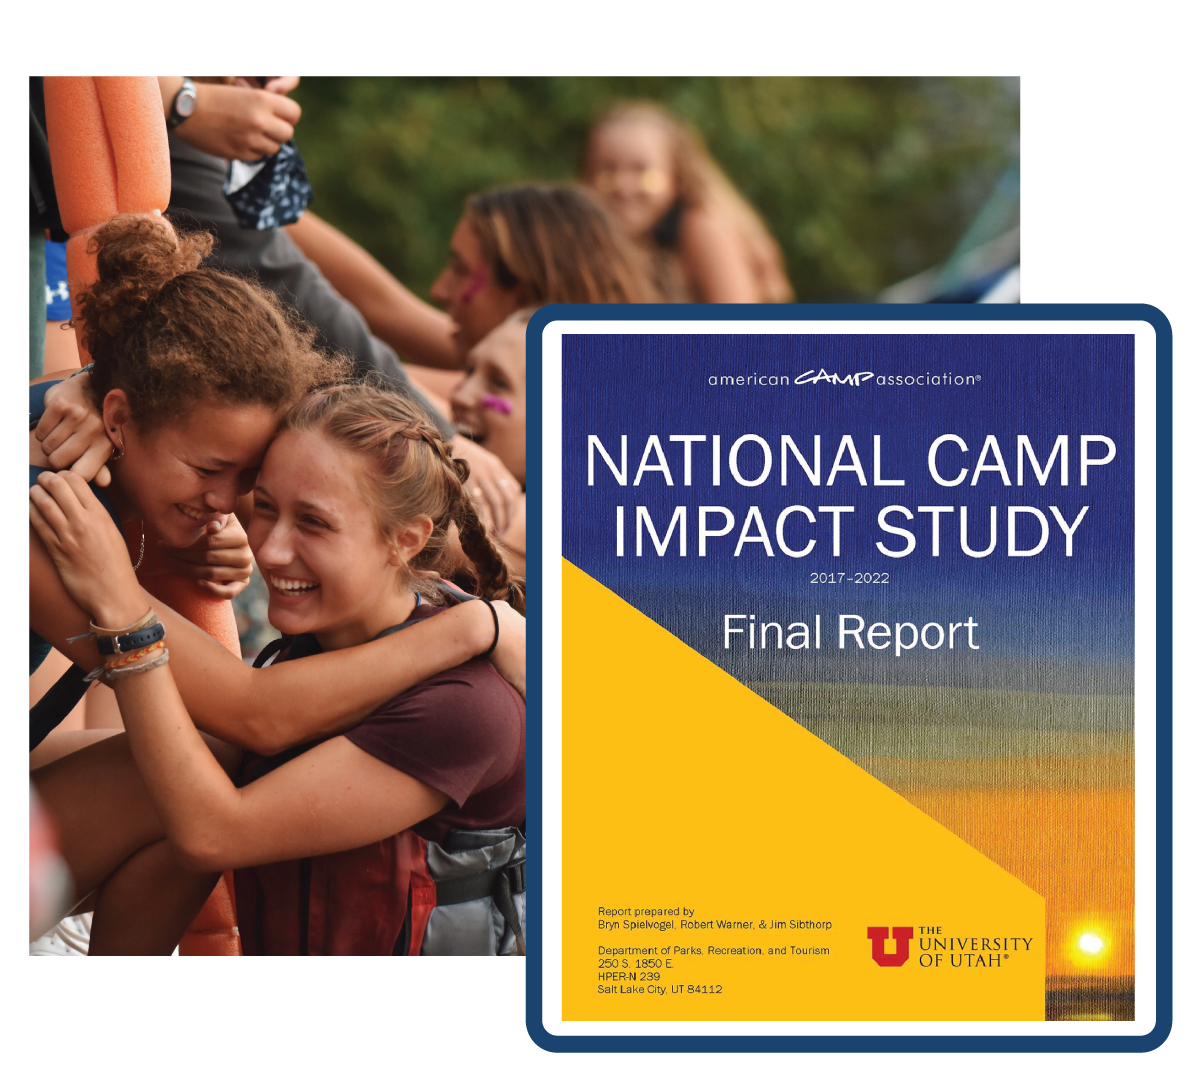 Impact cover with campers in background